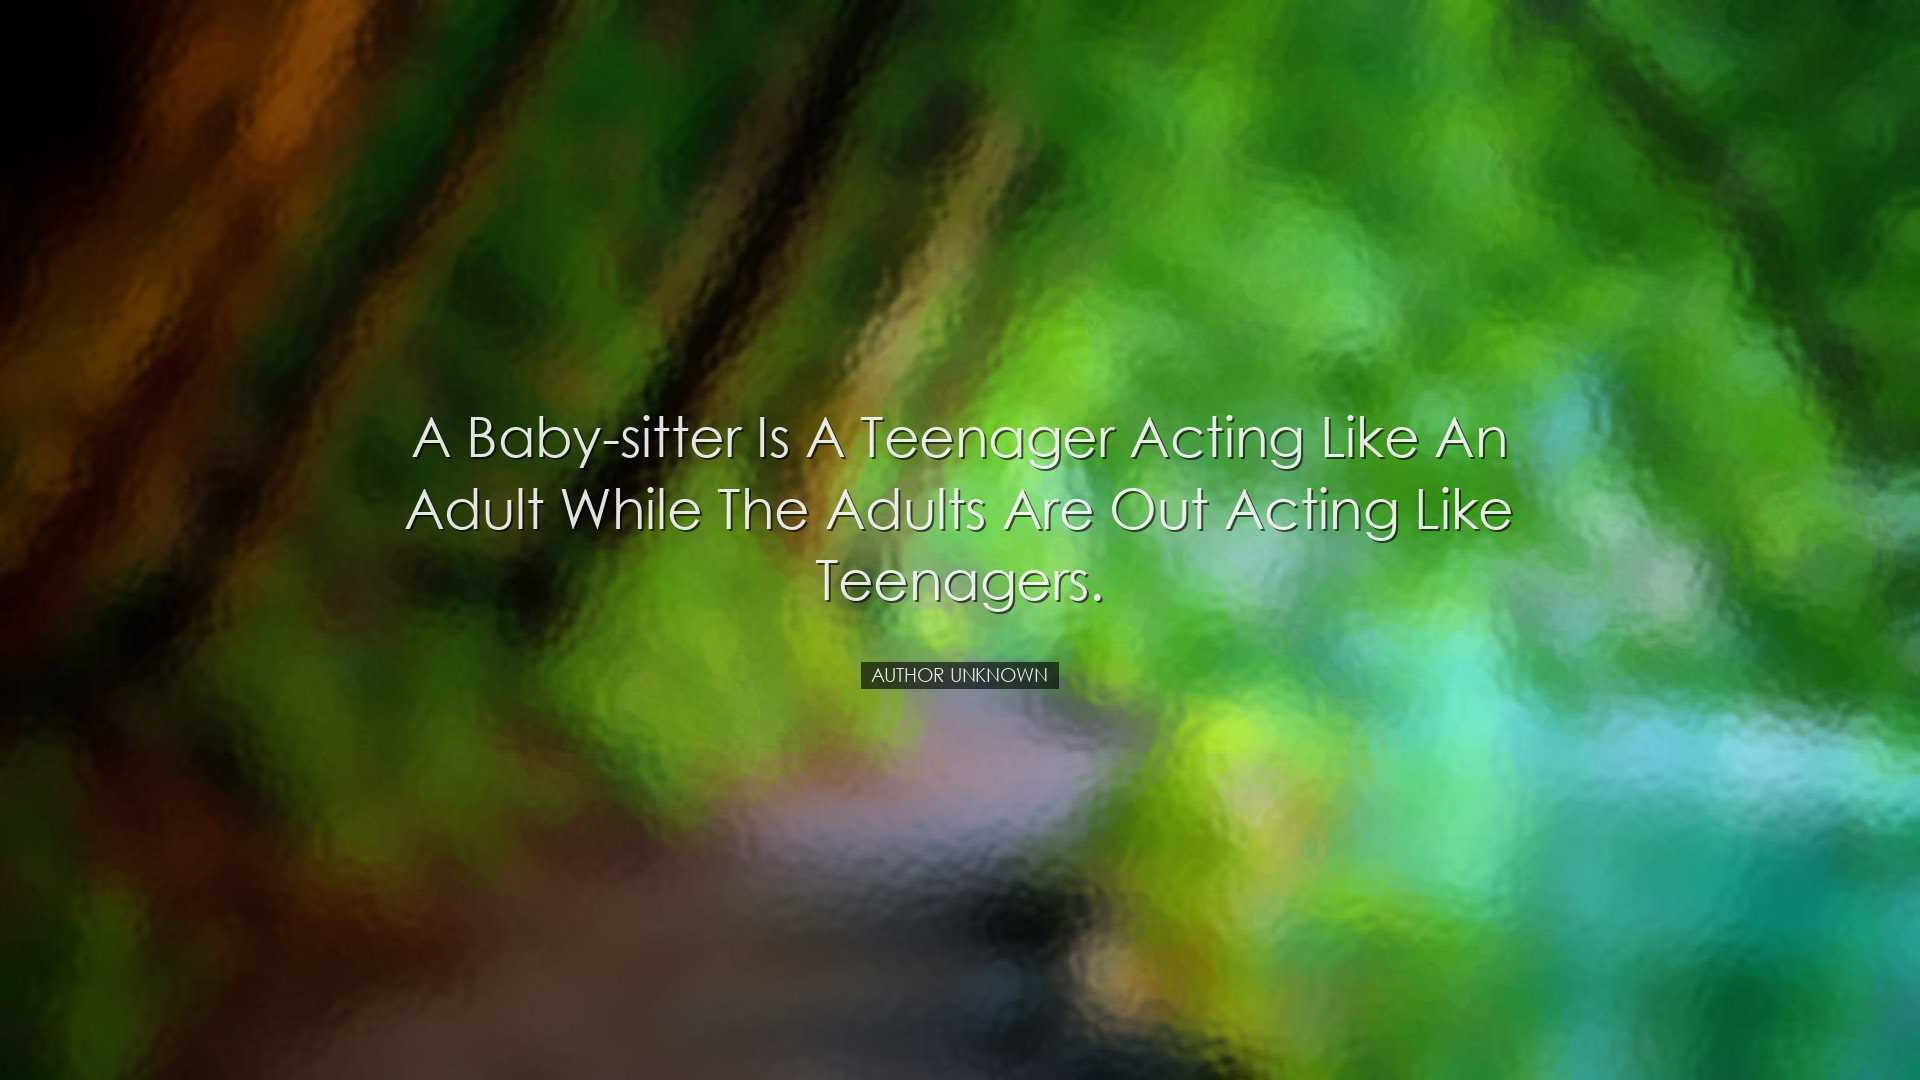 A baby-sitter is a teenager acting like an adult while the adults